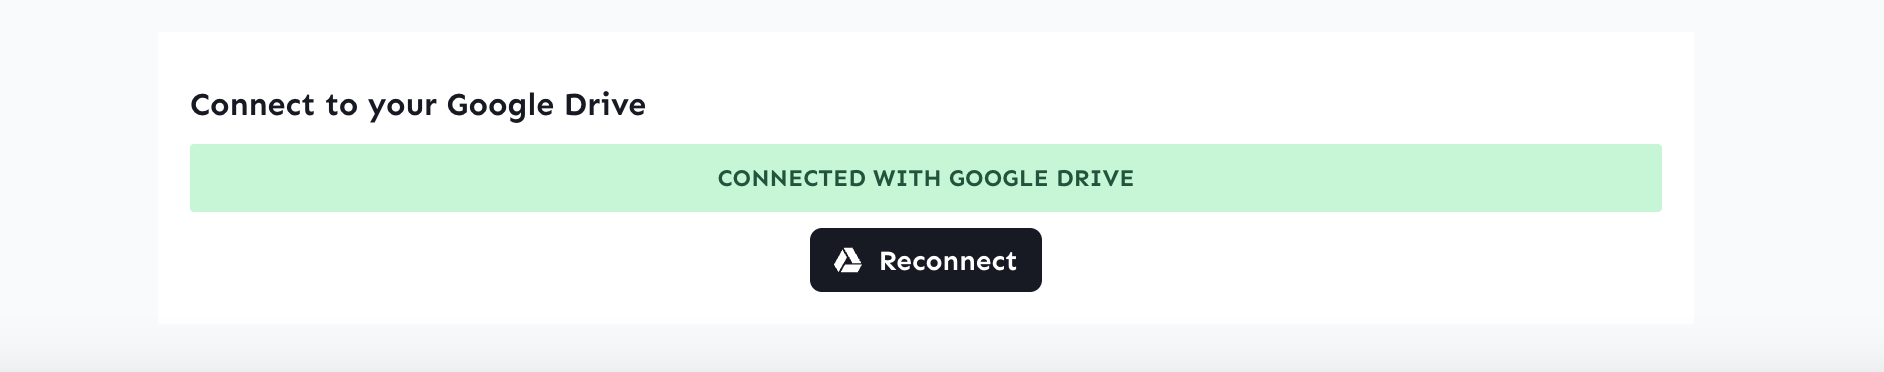 Reconnect Google Drive